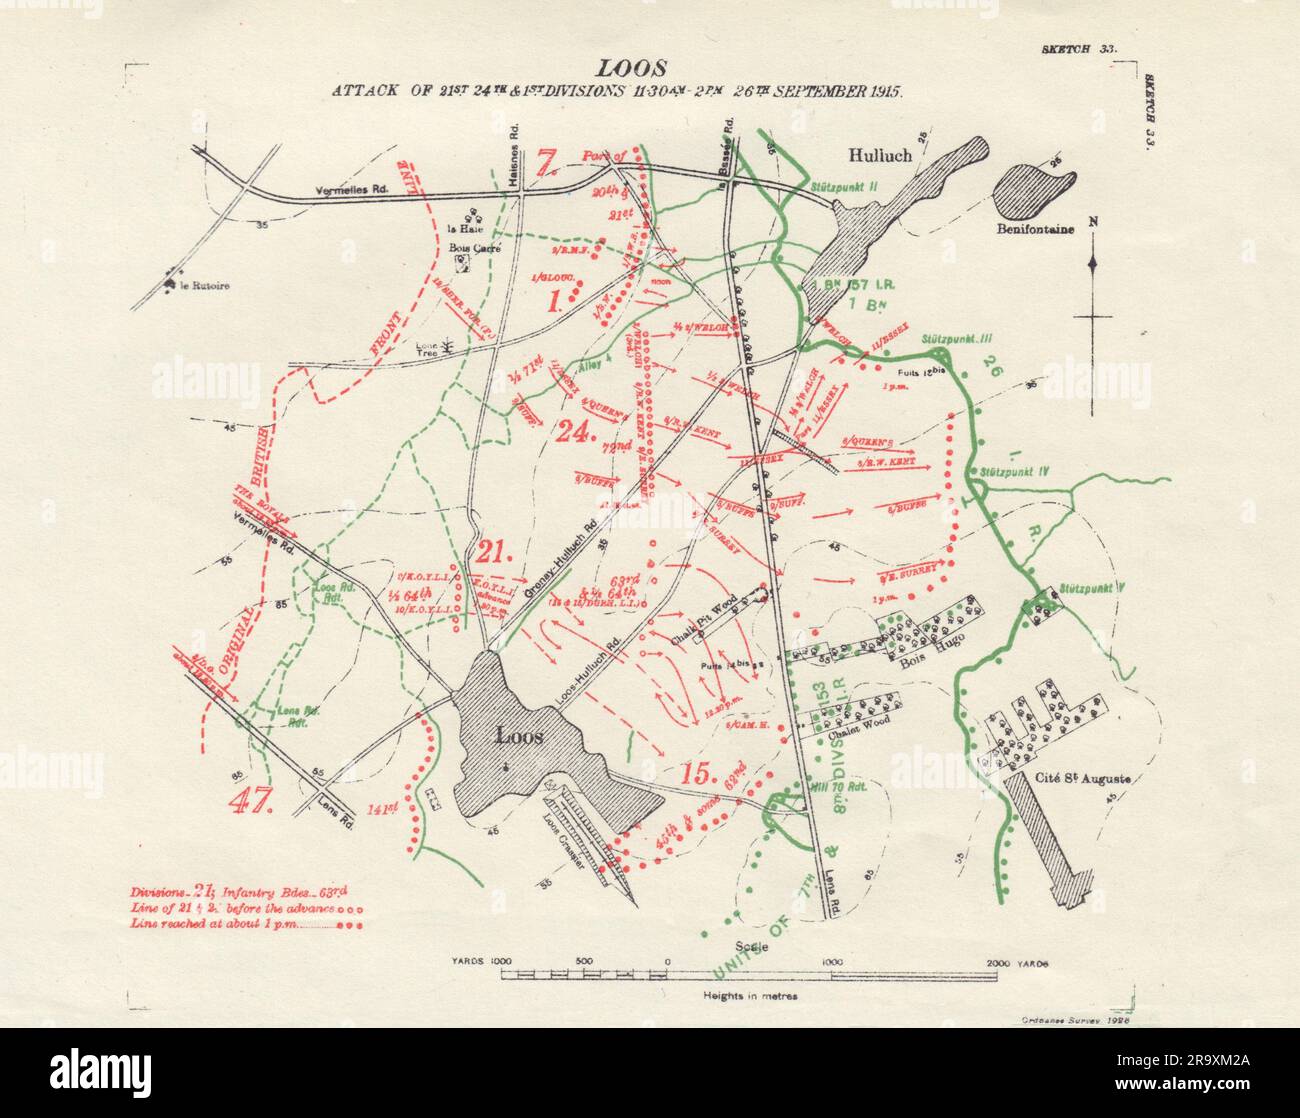 Battle of Loos 21/24 Divisions attack 11:30am-2pm 26 Sept 1915 Trenches 1928 map Stock Photo